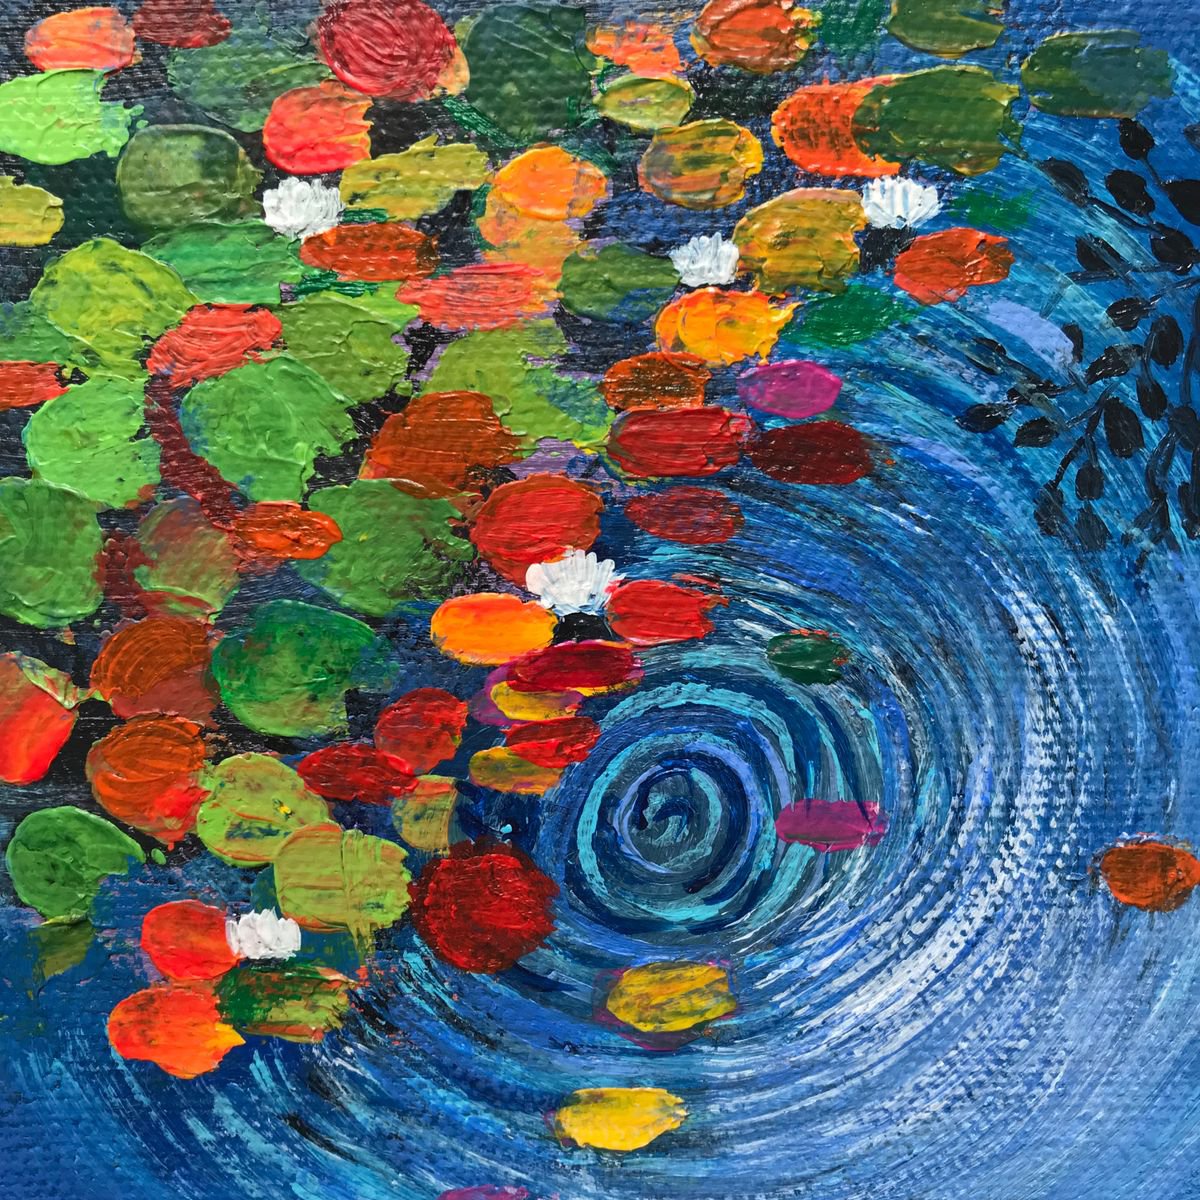 Water lilies pond with ripples ! Miniature painting! Ready to hang! by Amita Dand